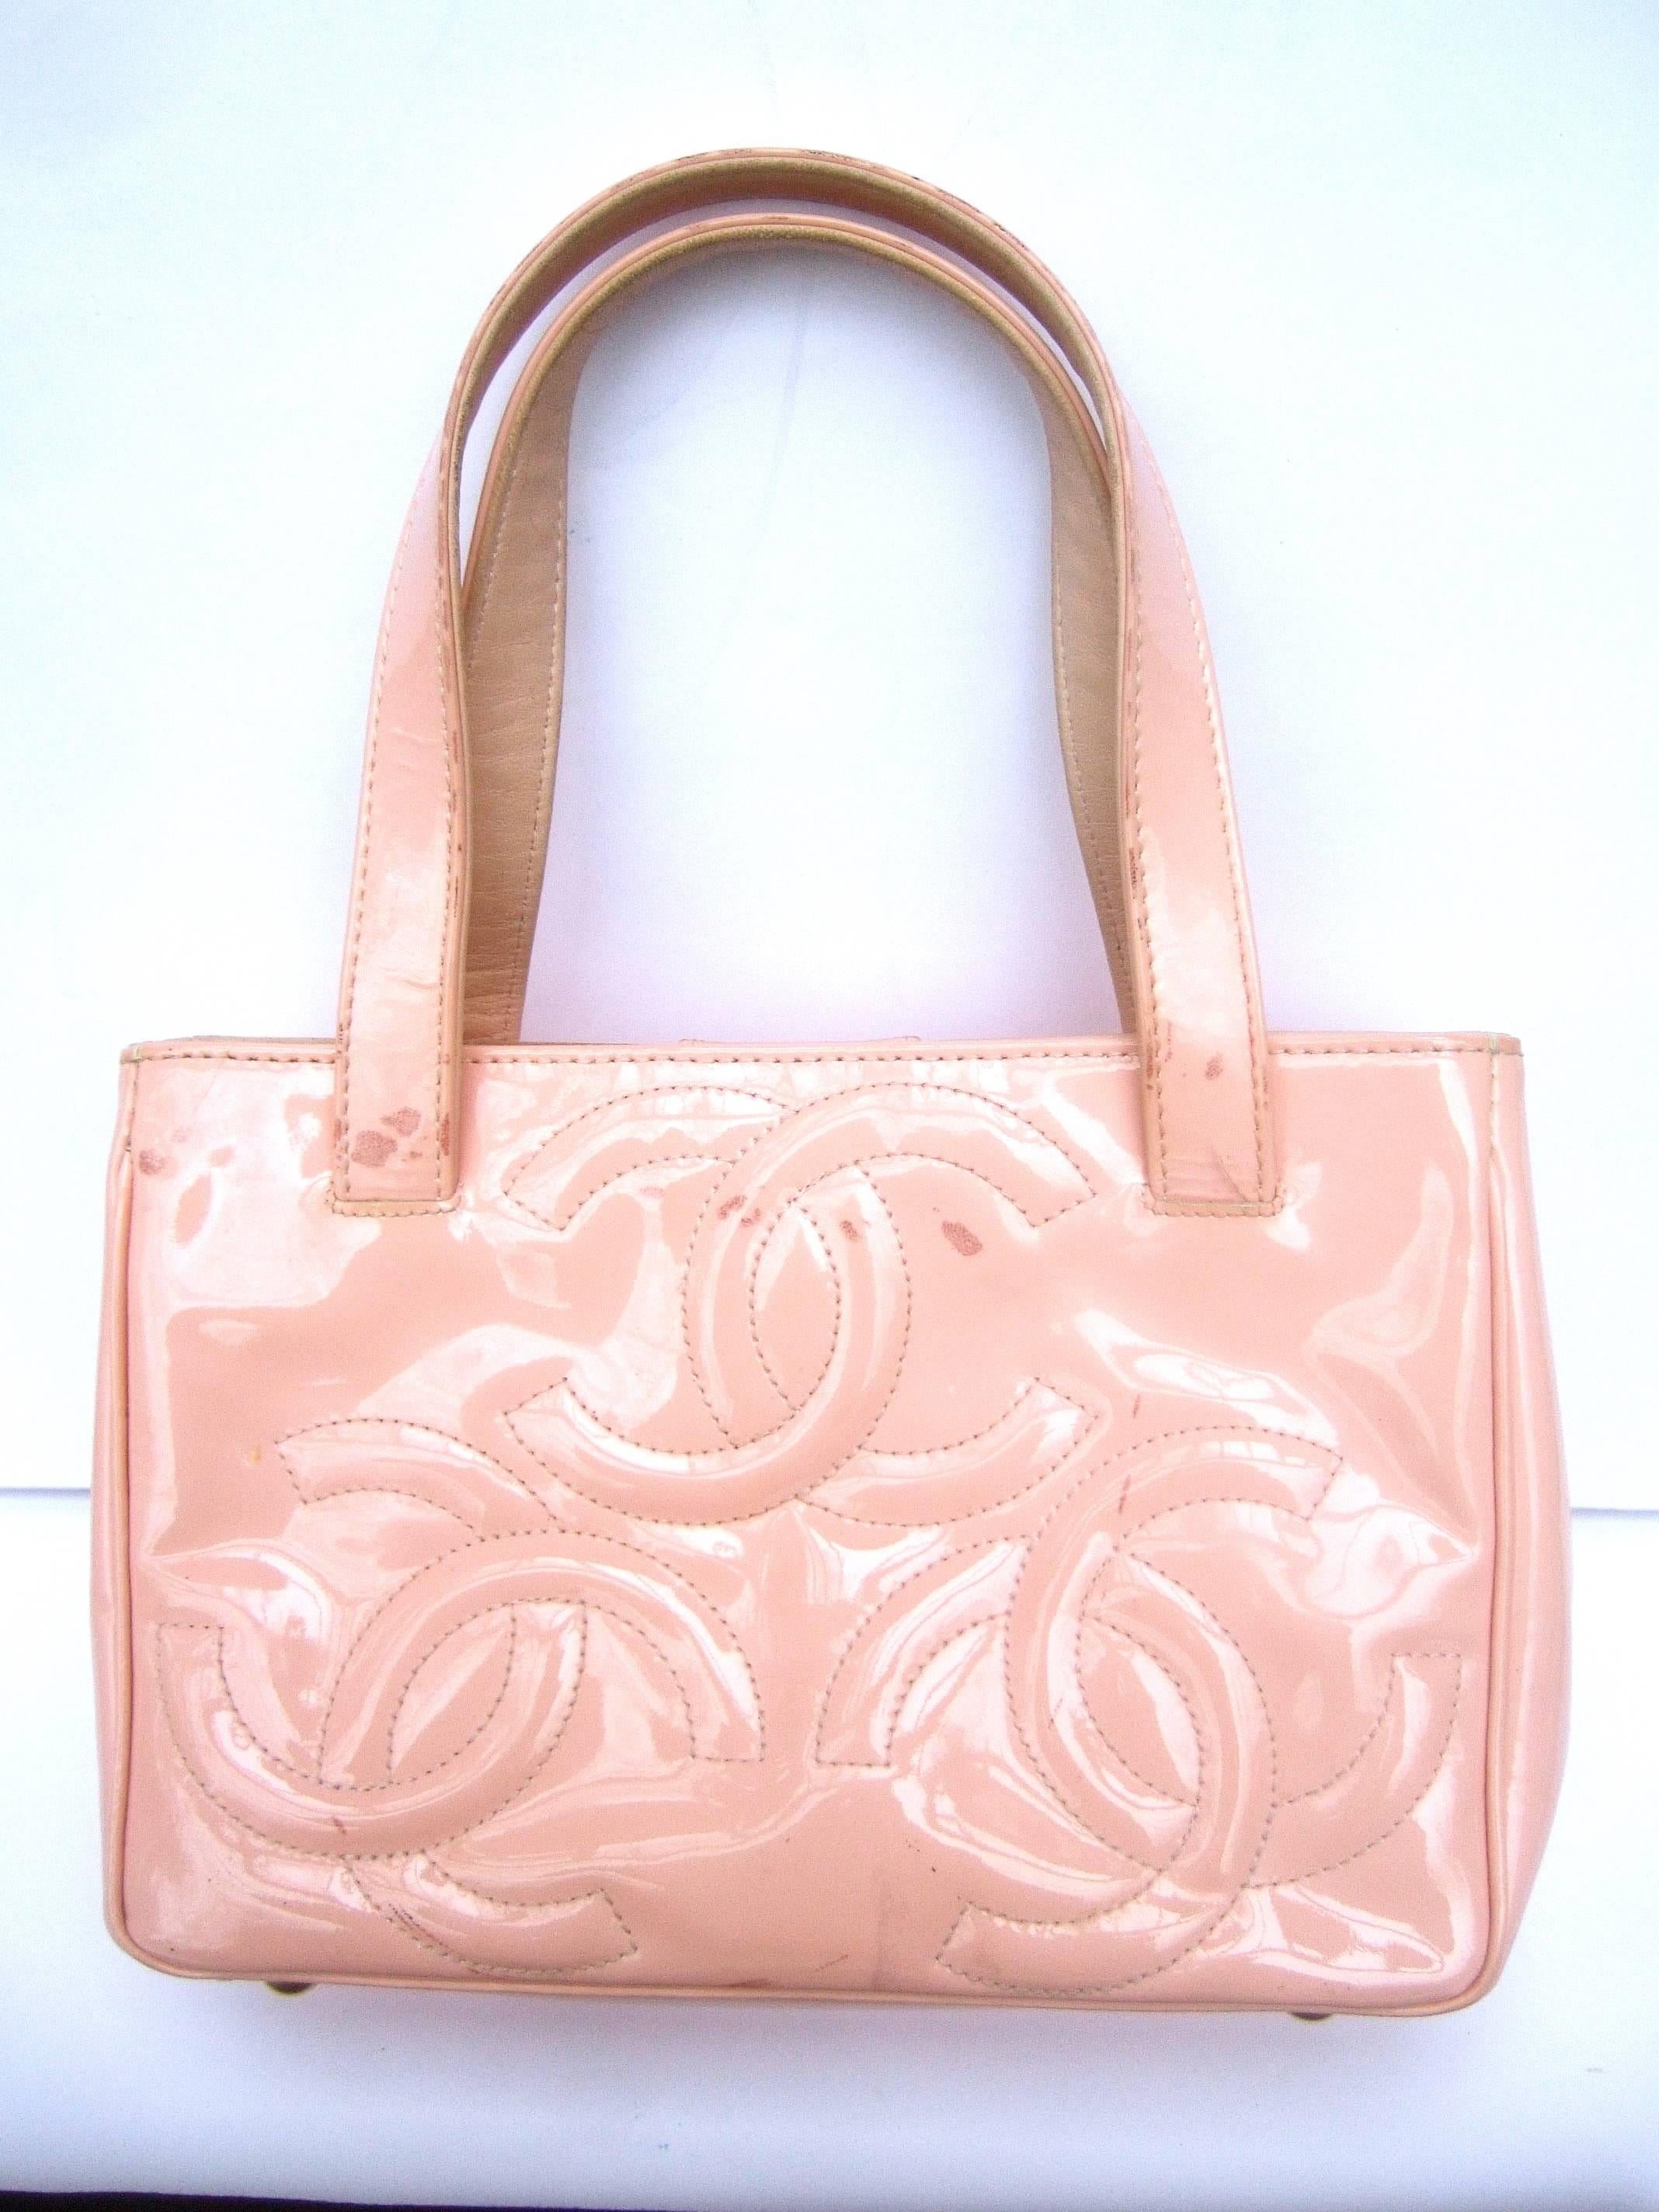 Chanel Pink Patent Leather Handbag In Shabby Chic Condition  2